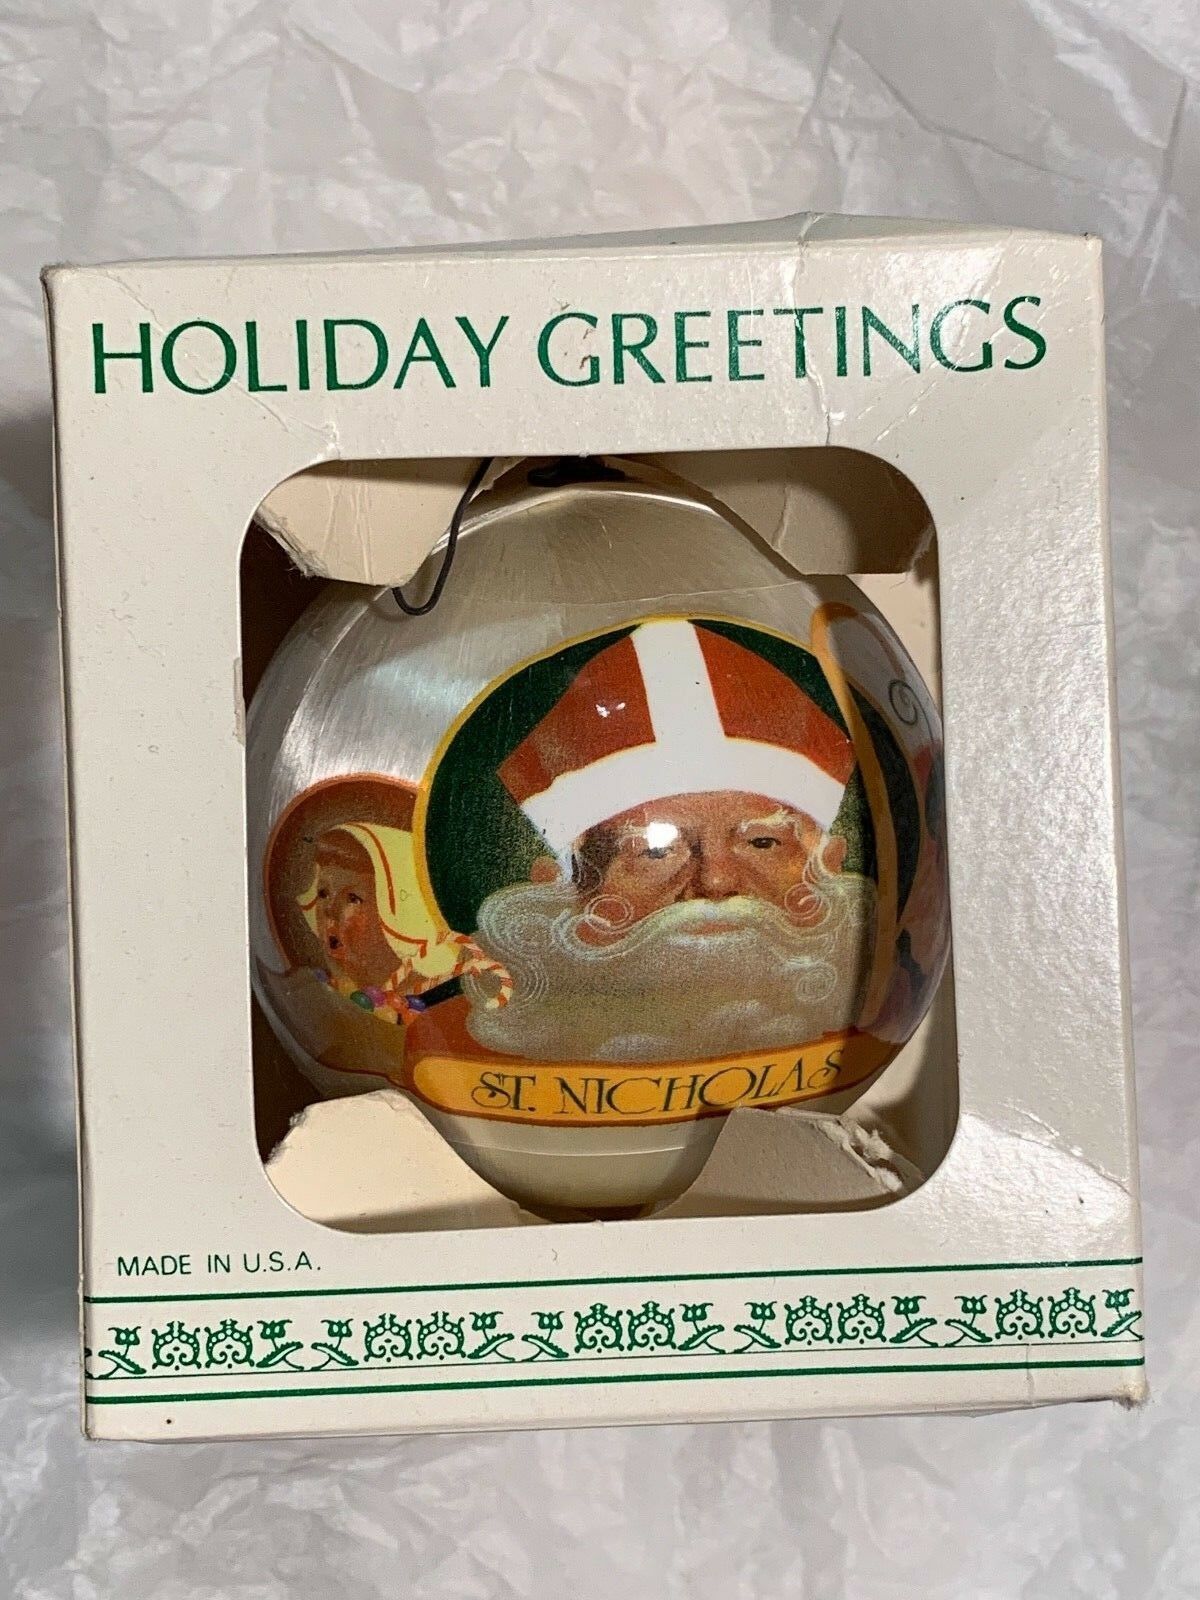 Primary image for Holiday Greetings Christmas Ornament